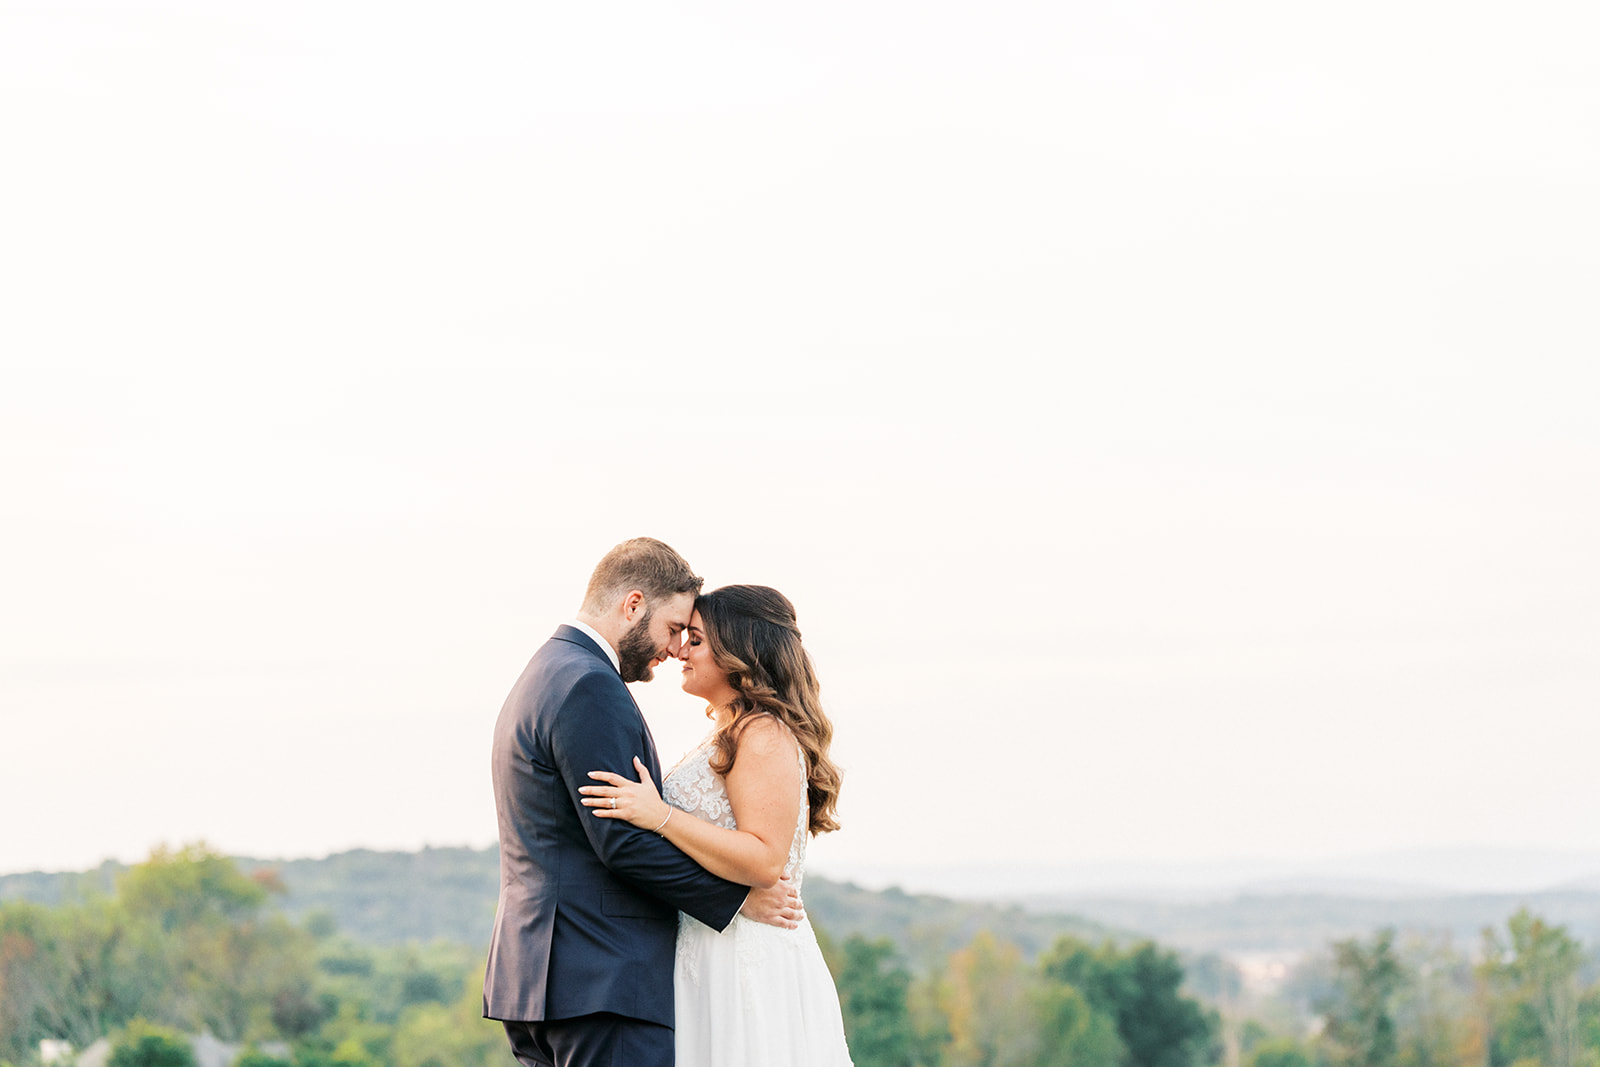 Newlyweds touch foreheads while standing on a hill overlooking a valley at sunset